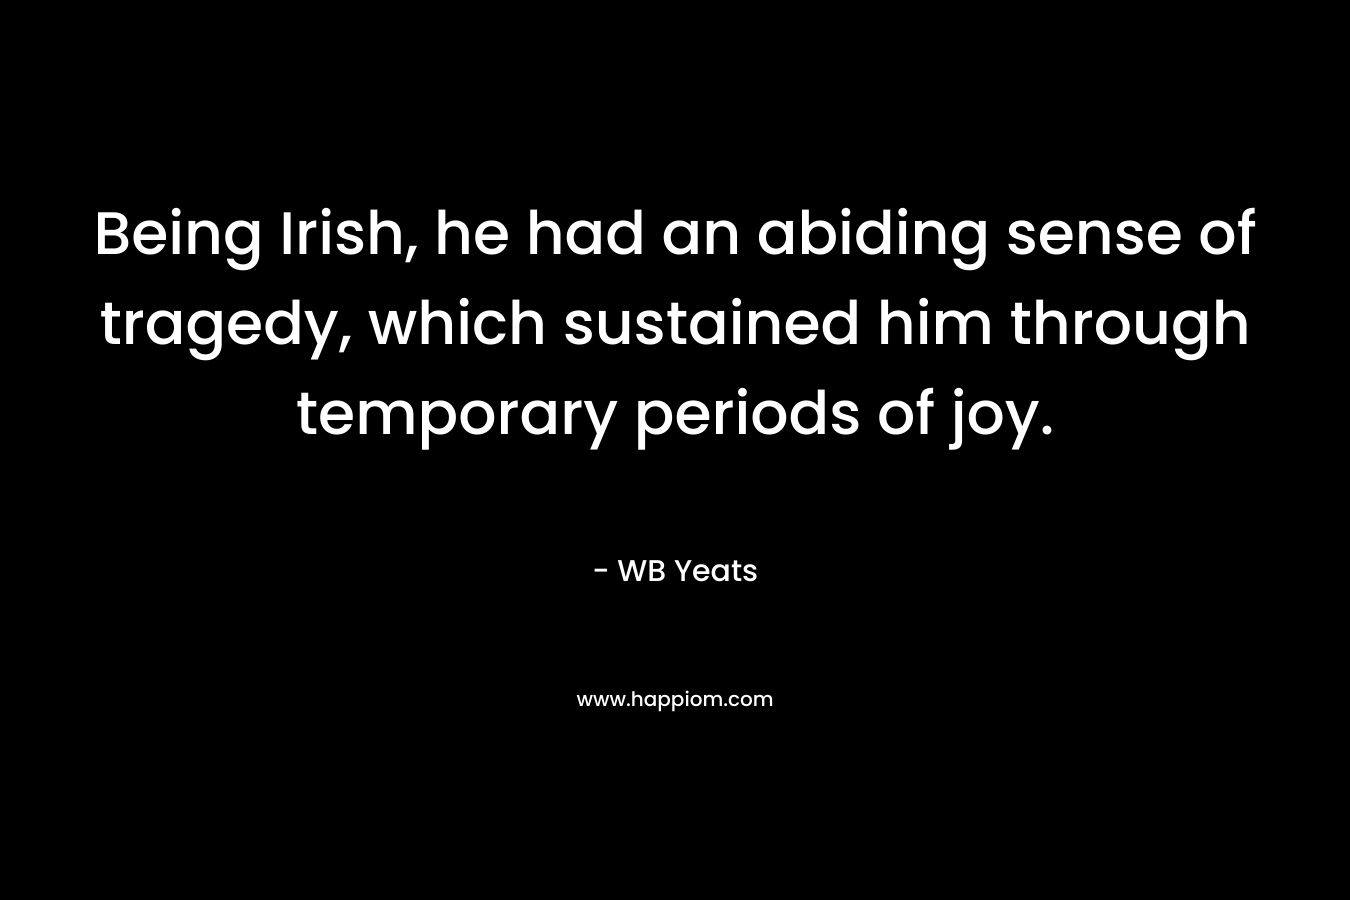 Being Irish, he had an abiding sense of tragedy, which sustained him through temporary periods of joy.